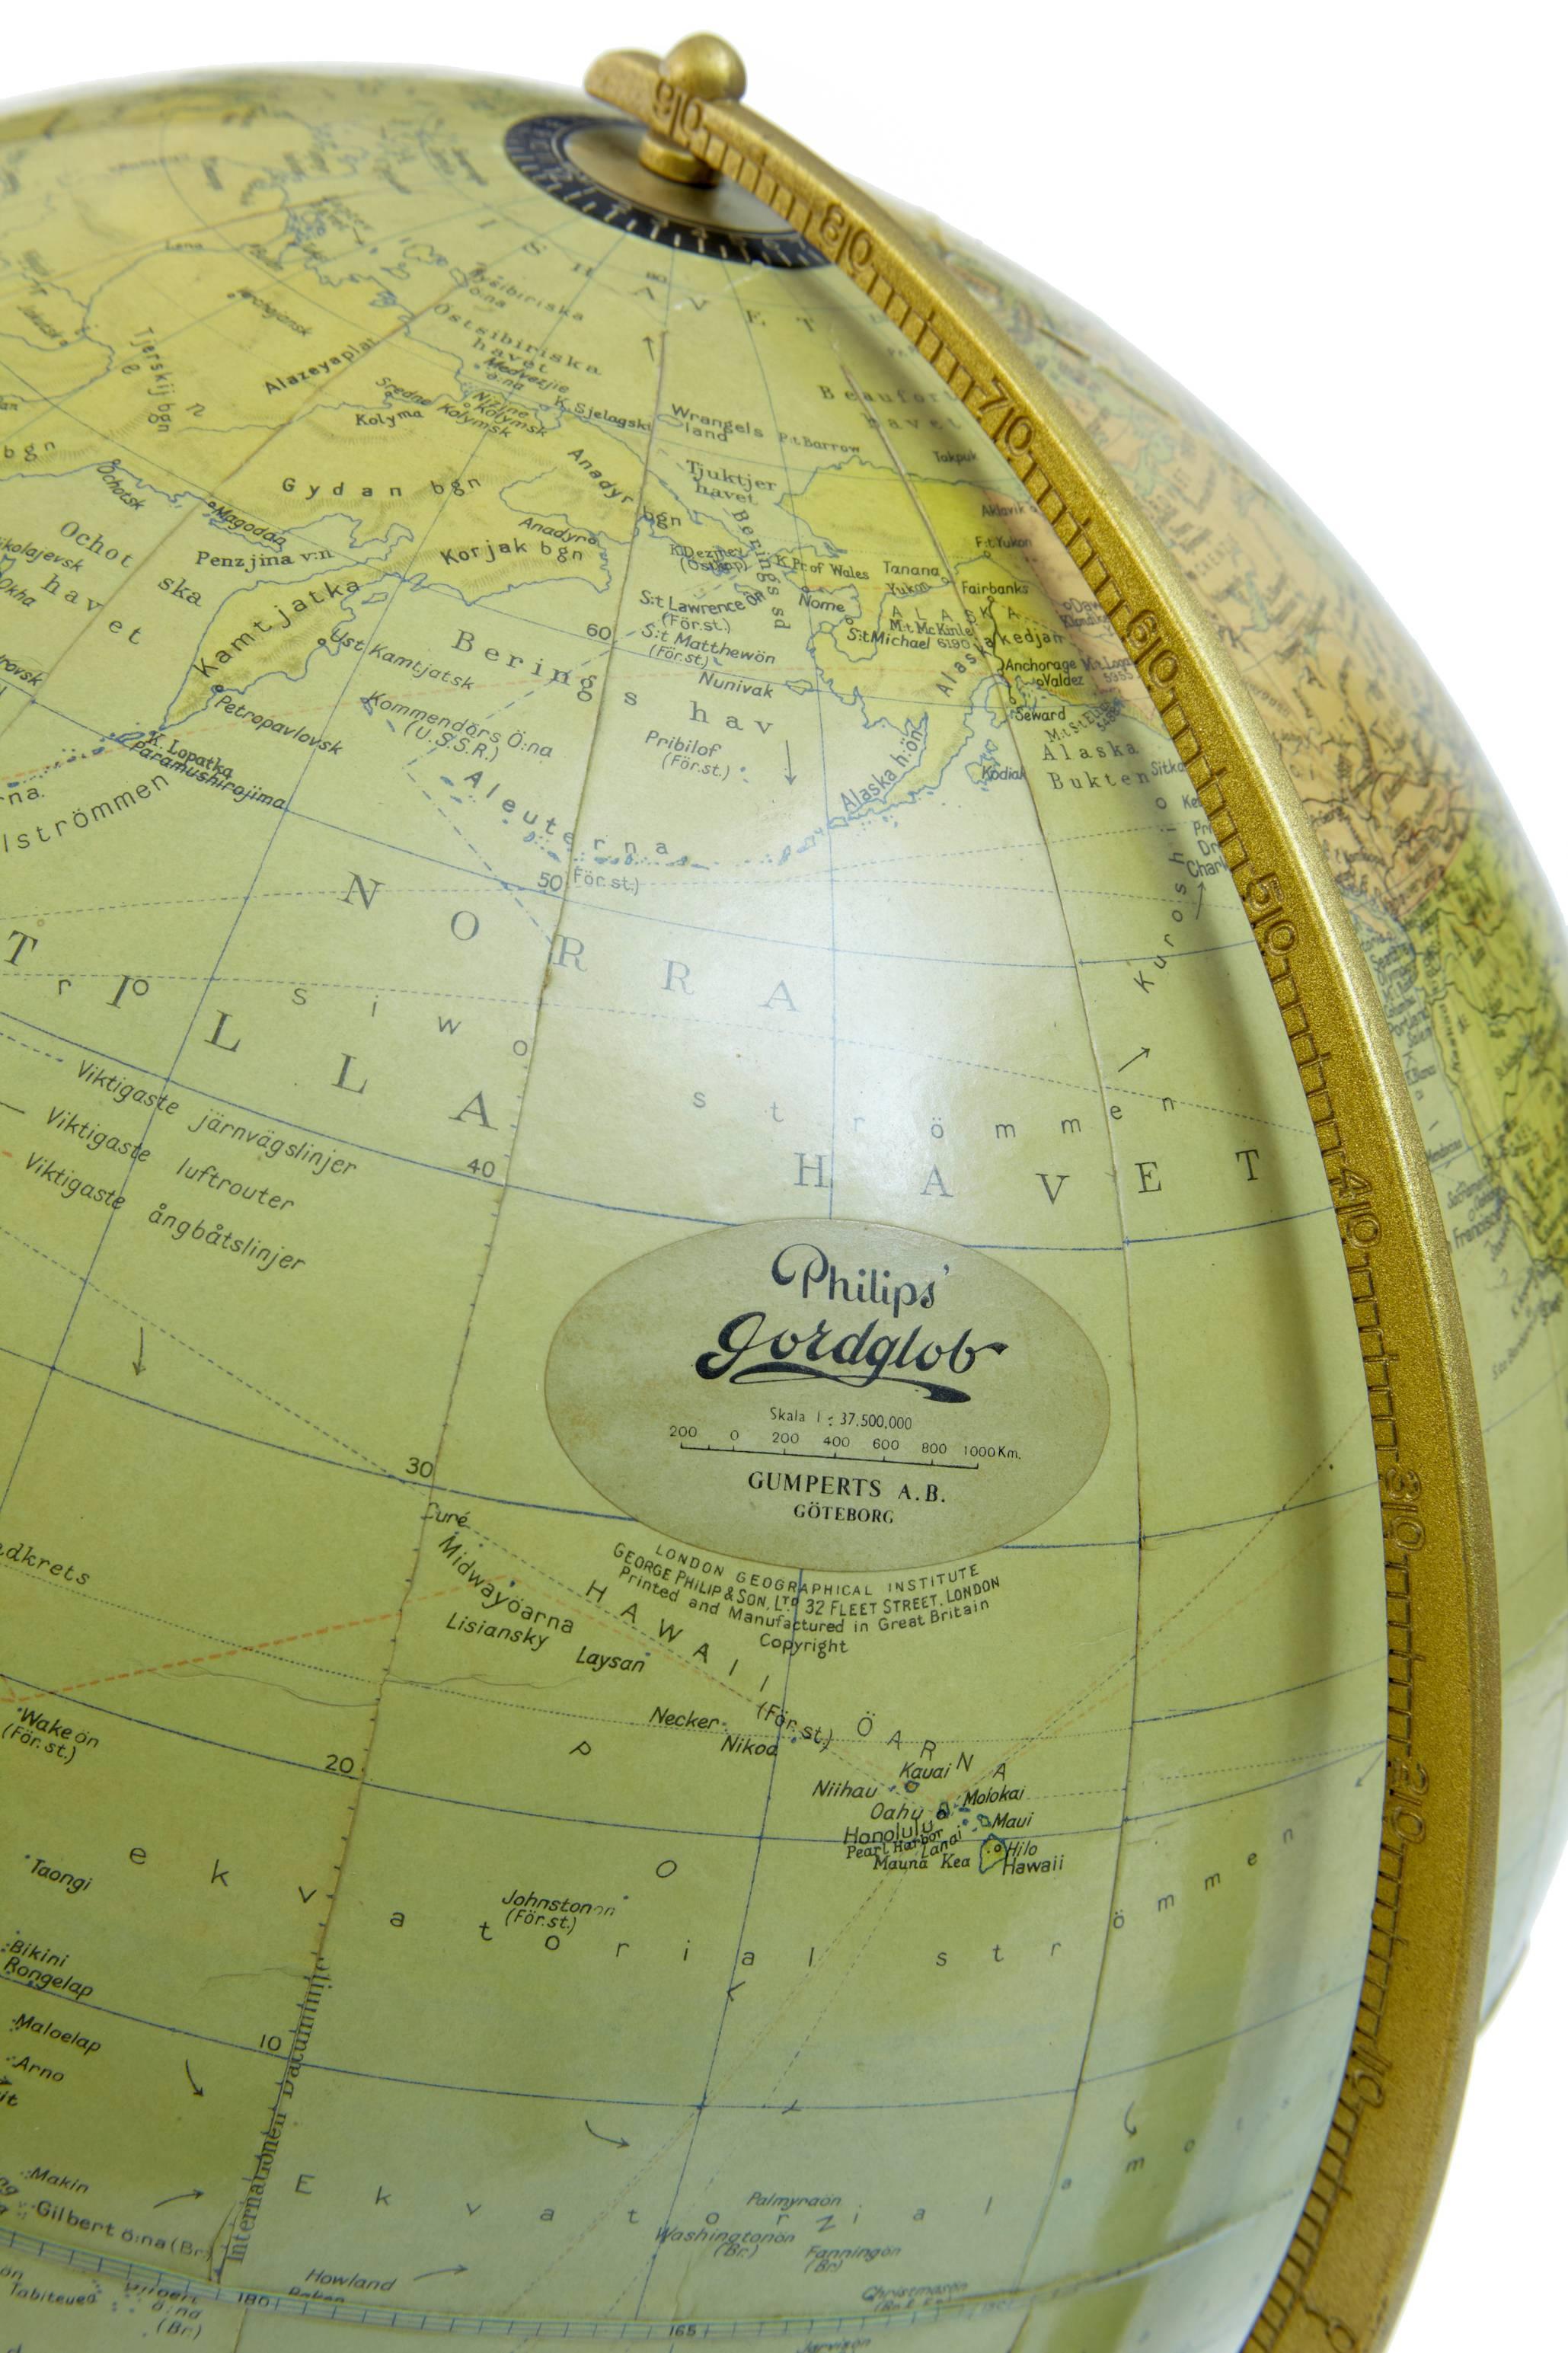 Swedish globe, circa 1930.
By Philips of Goteborg, printed in England.
Papier mâché.
Standing on Art Deco bakelite stand with inset compass.
Light paper damage near greenland.

Height: 17 1/2